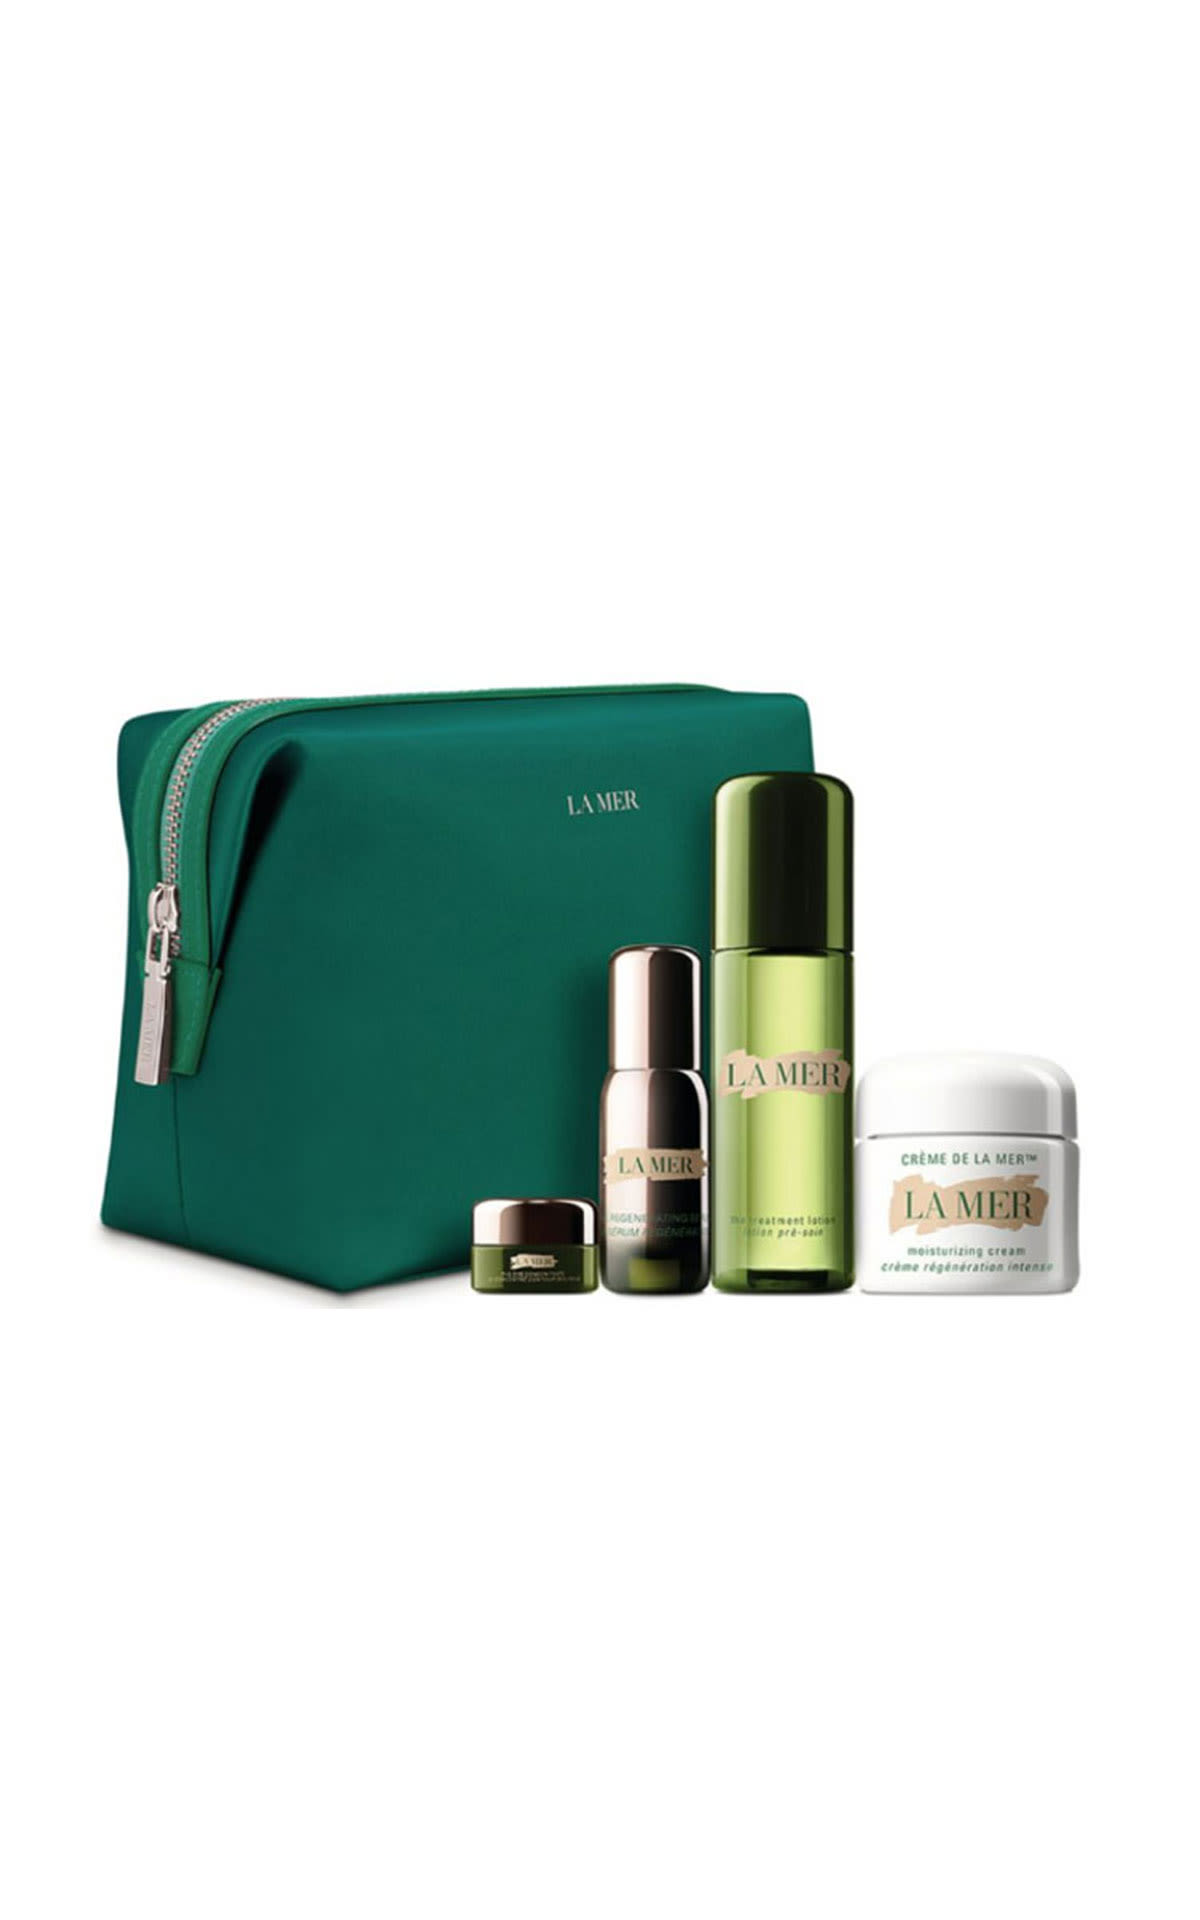 The Cosmetics Company Store La Mer The rejuvenating rituals collection from Bicester Village